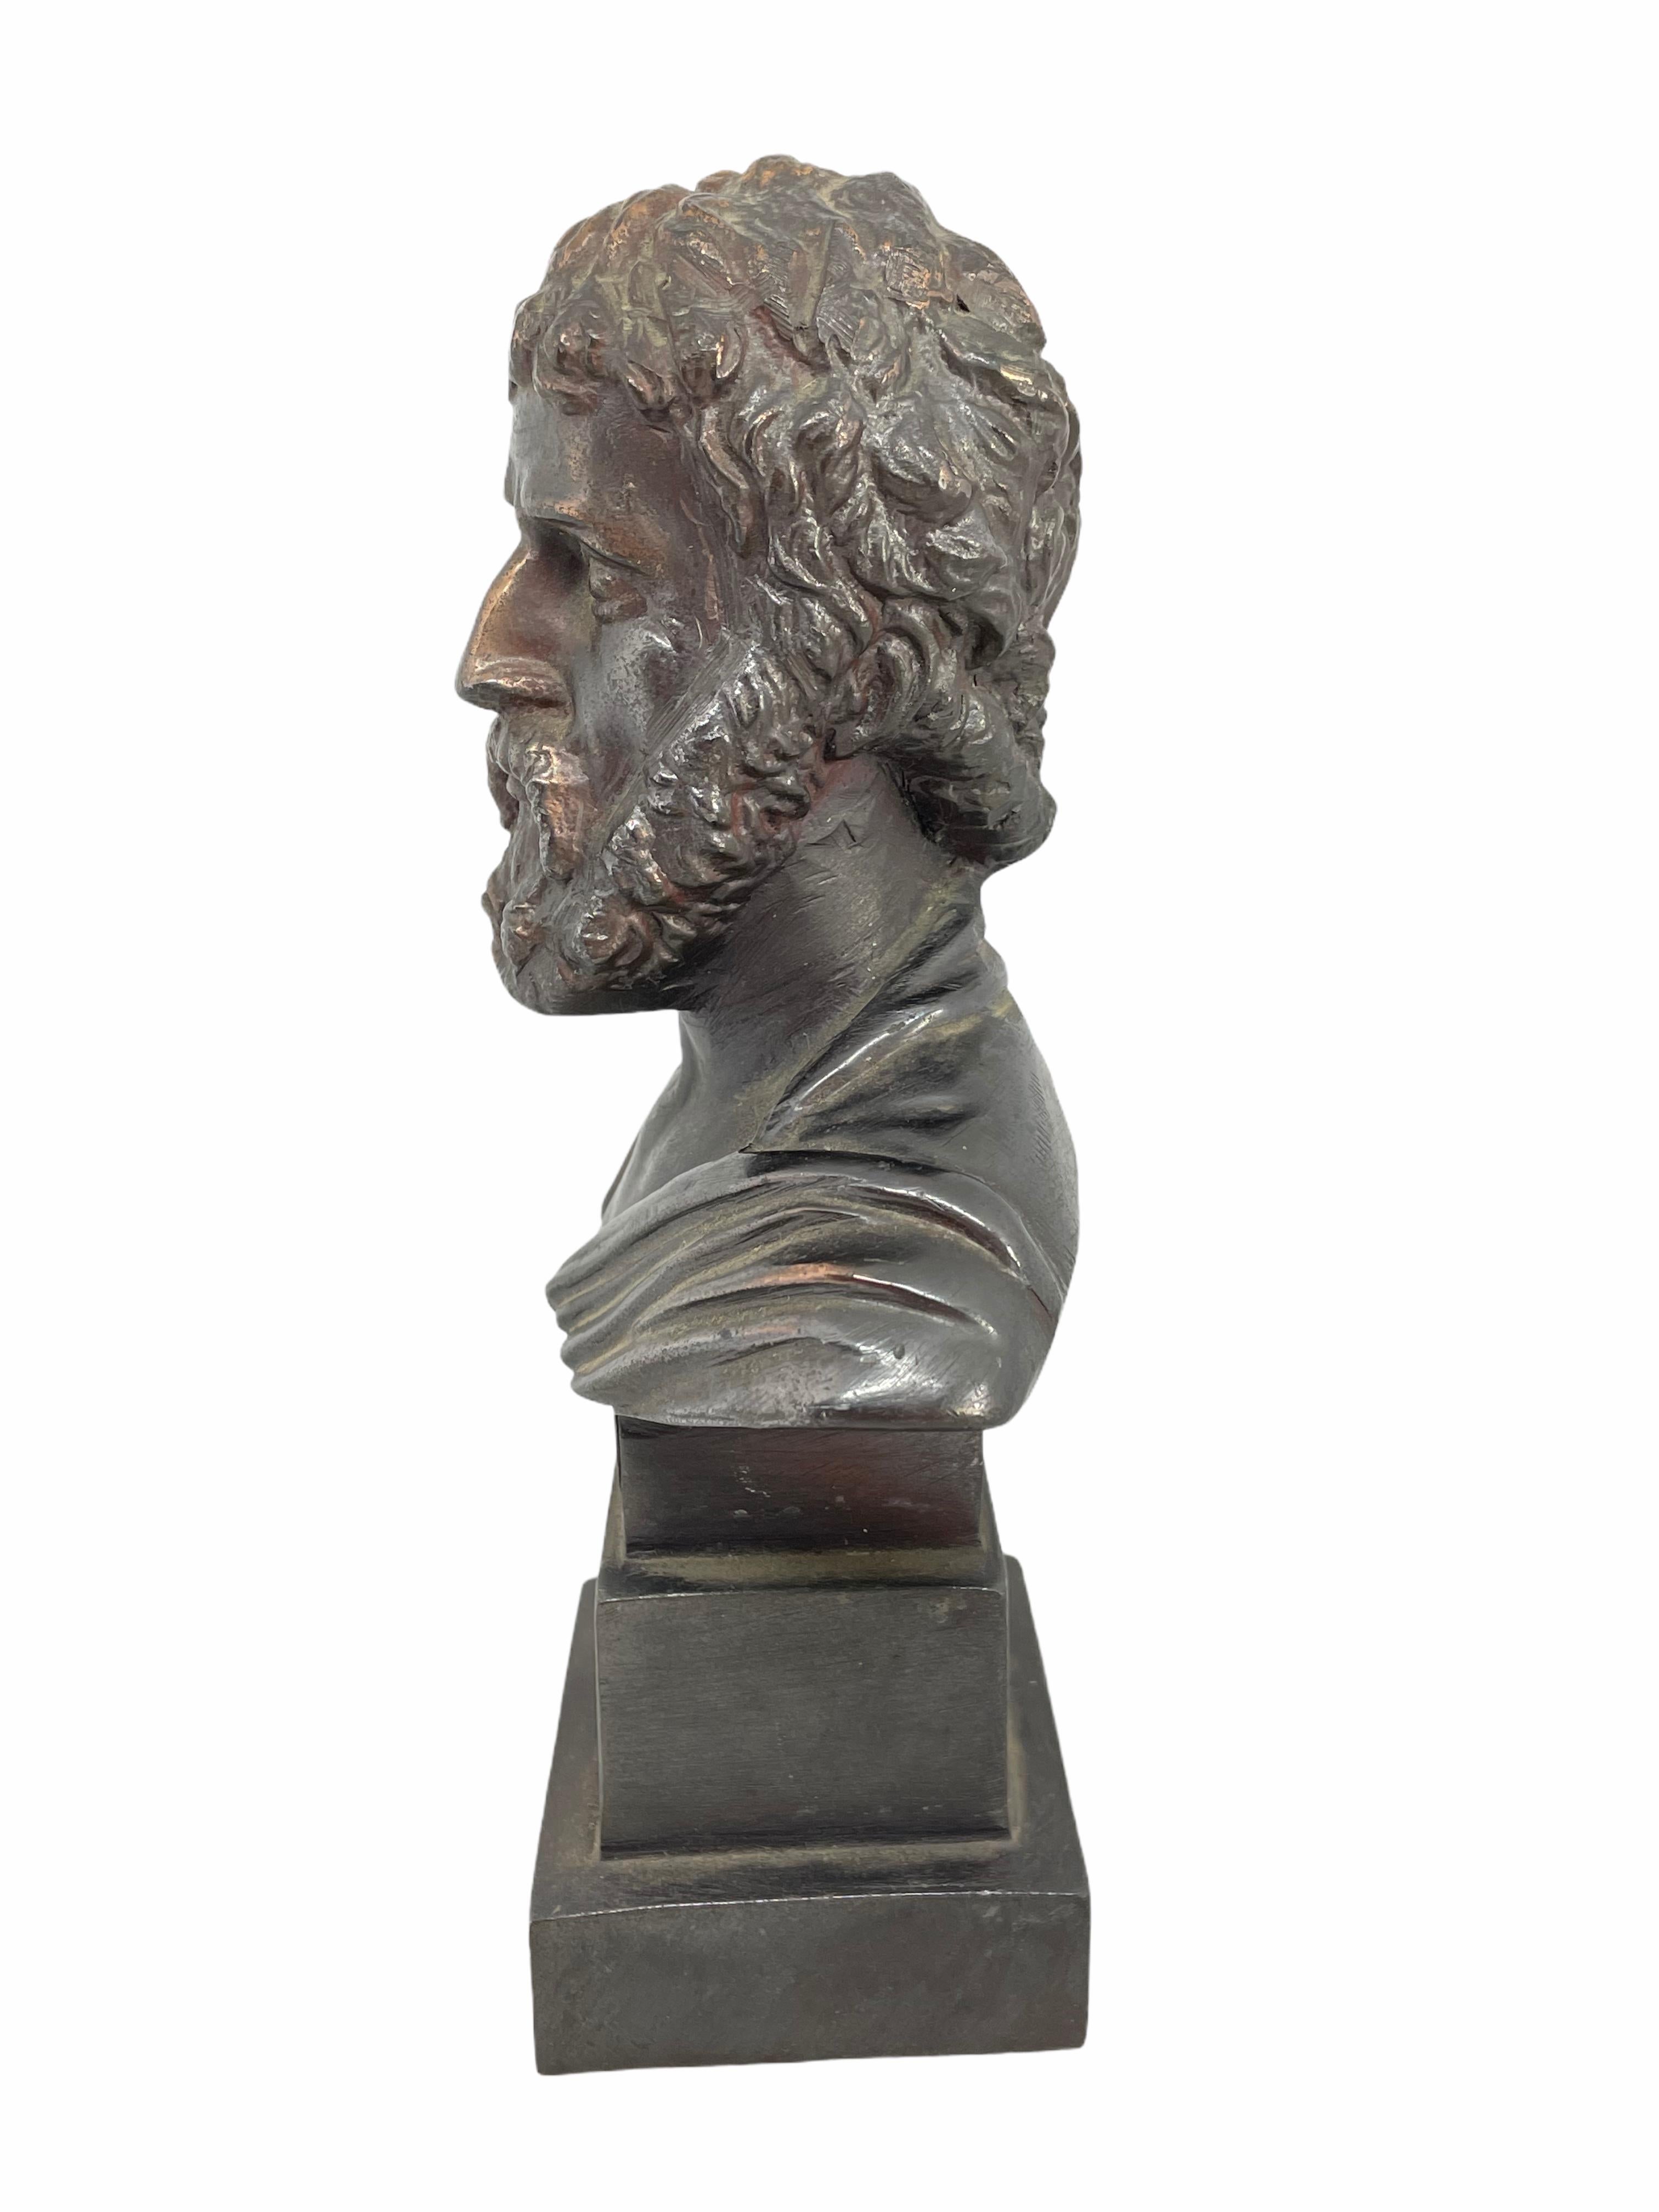 A classic decorative Bust statue. Some wear with a nice patina, but this is old-age. Made of metal. Very decorative and nice to display in your library or any room.